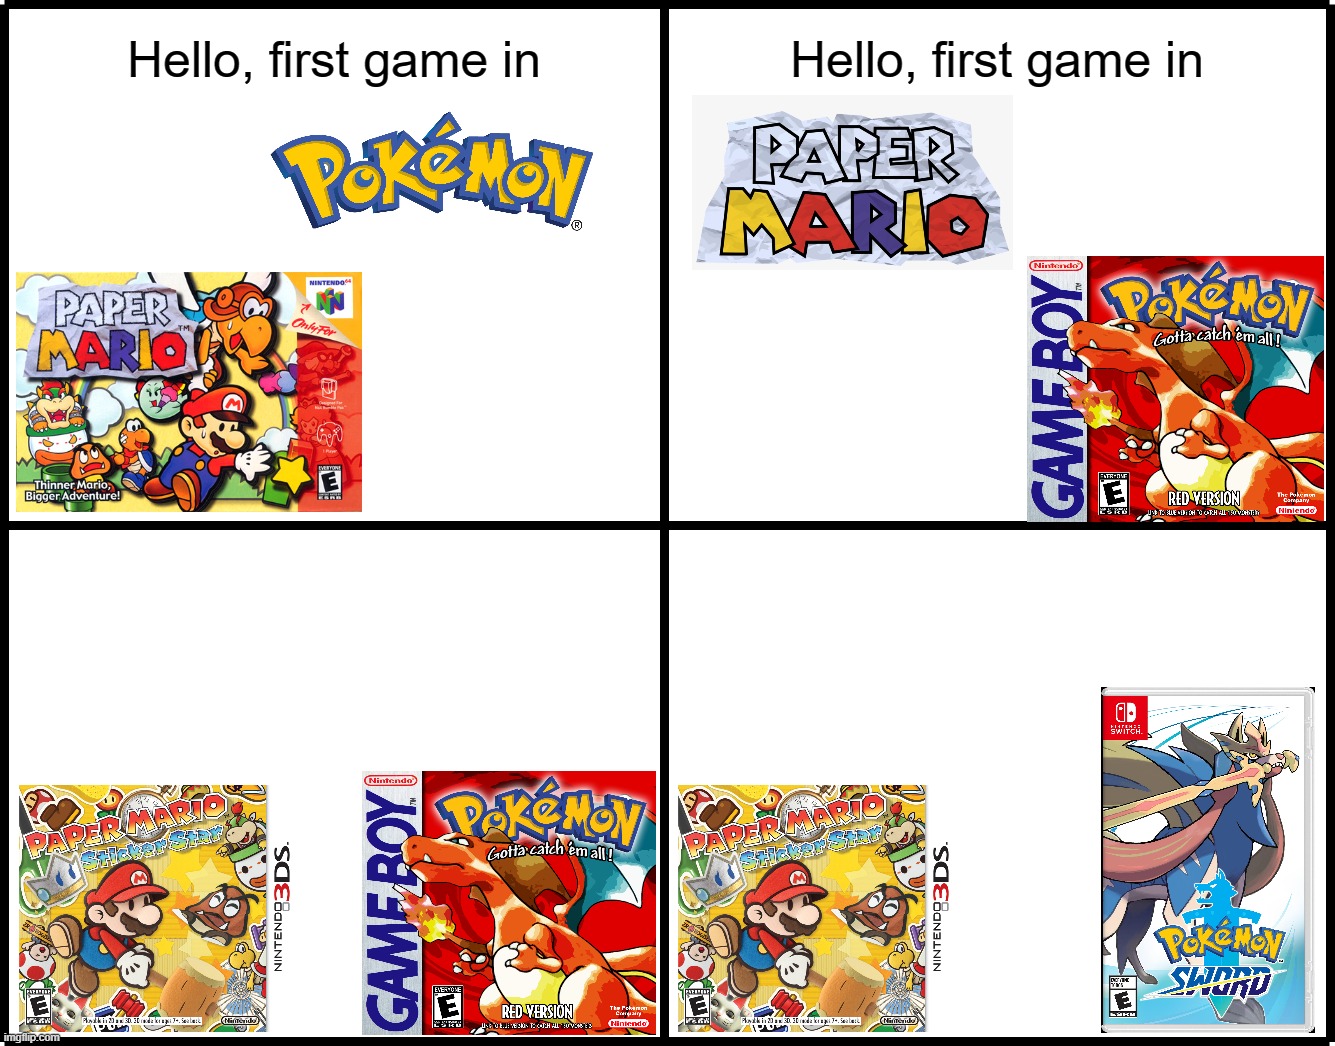 Hello, first game in; Hello, first game in | image tagged in hello,paper mario,sticker star,pokemon,pokemon sword and shield | made w/ Imgflip meme maker